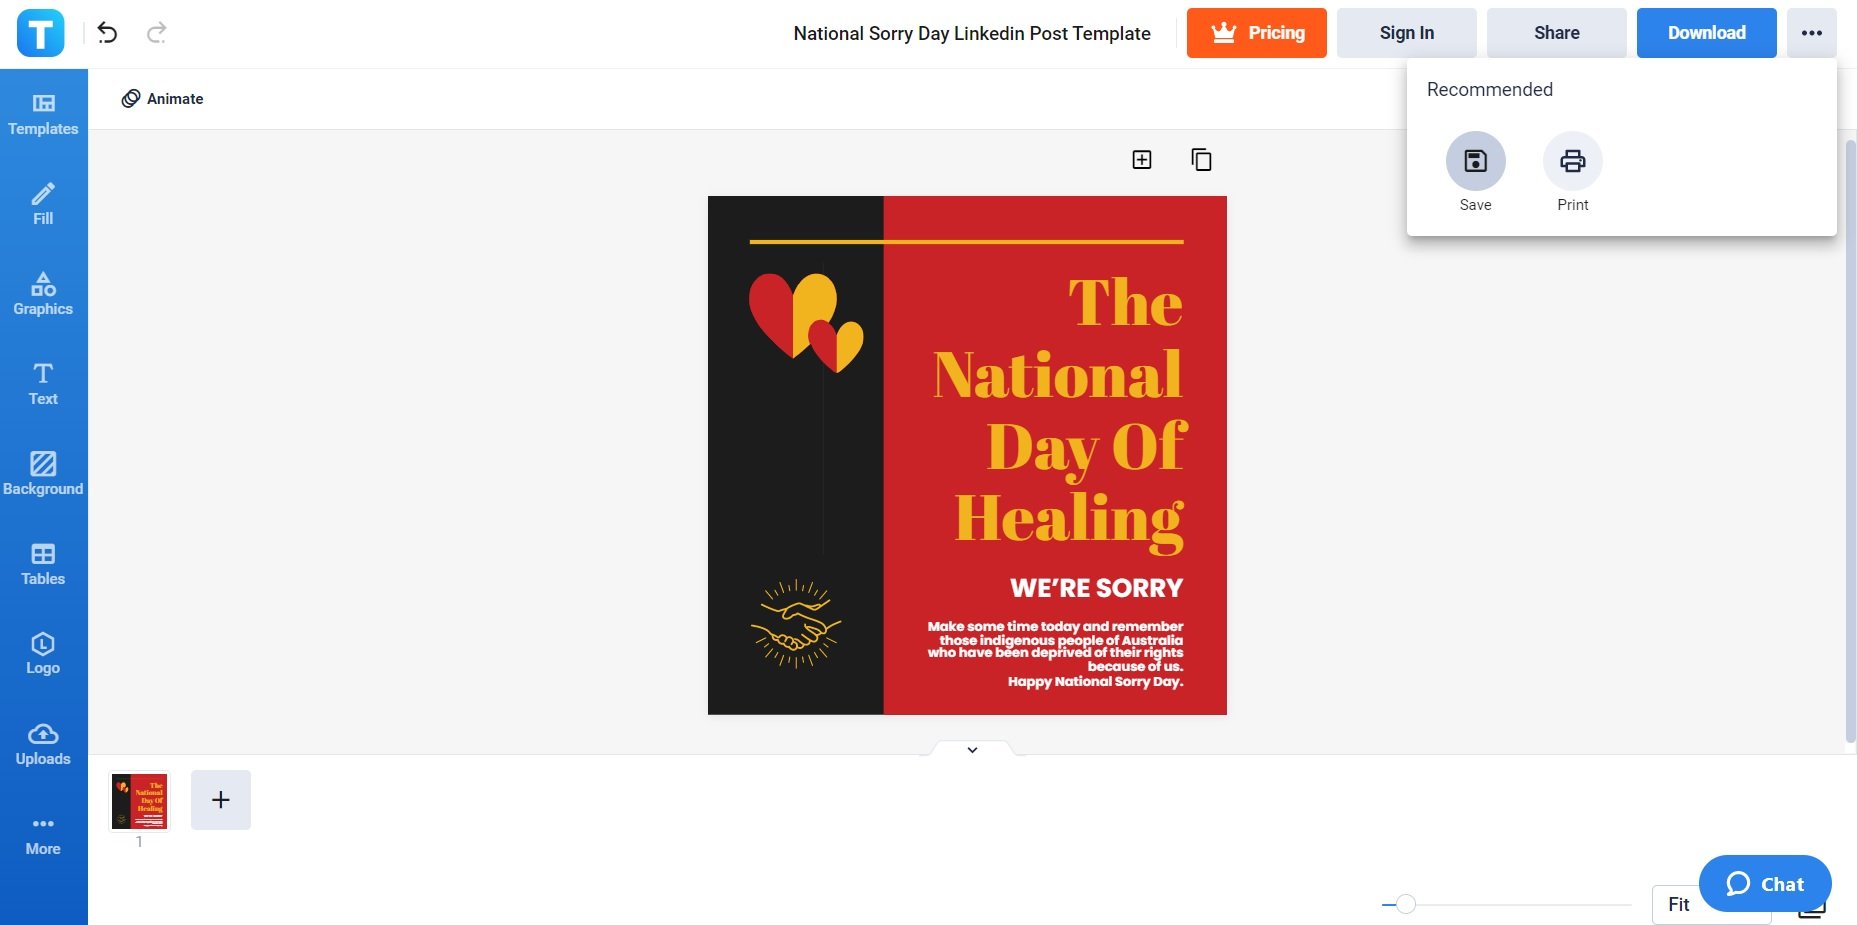 revise download and upload your new linkedin post for national sorry day